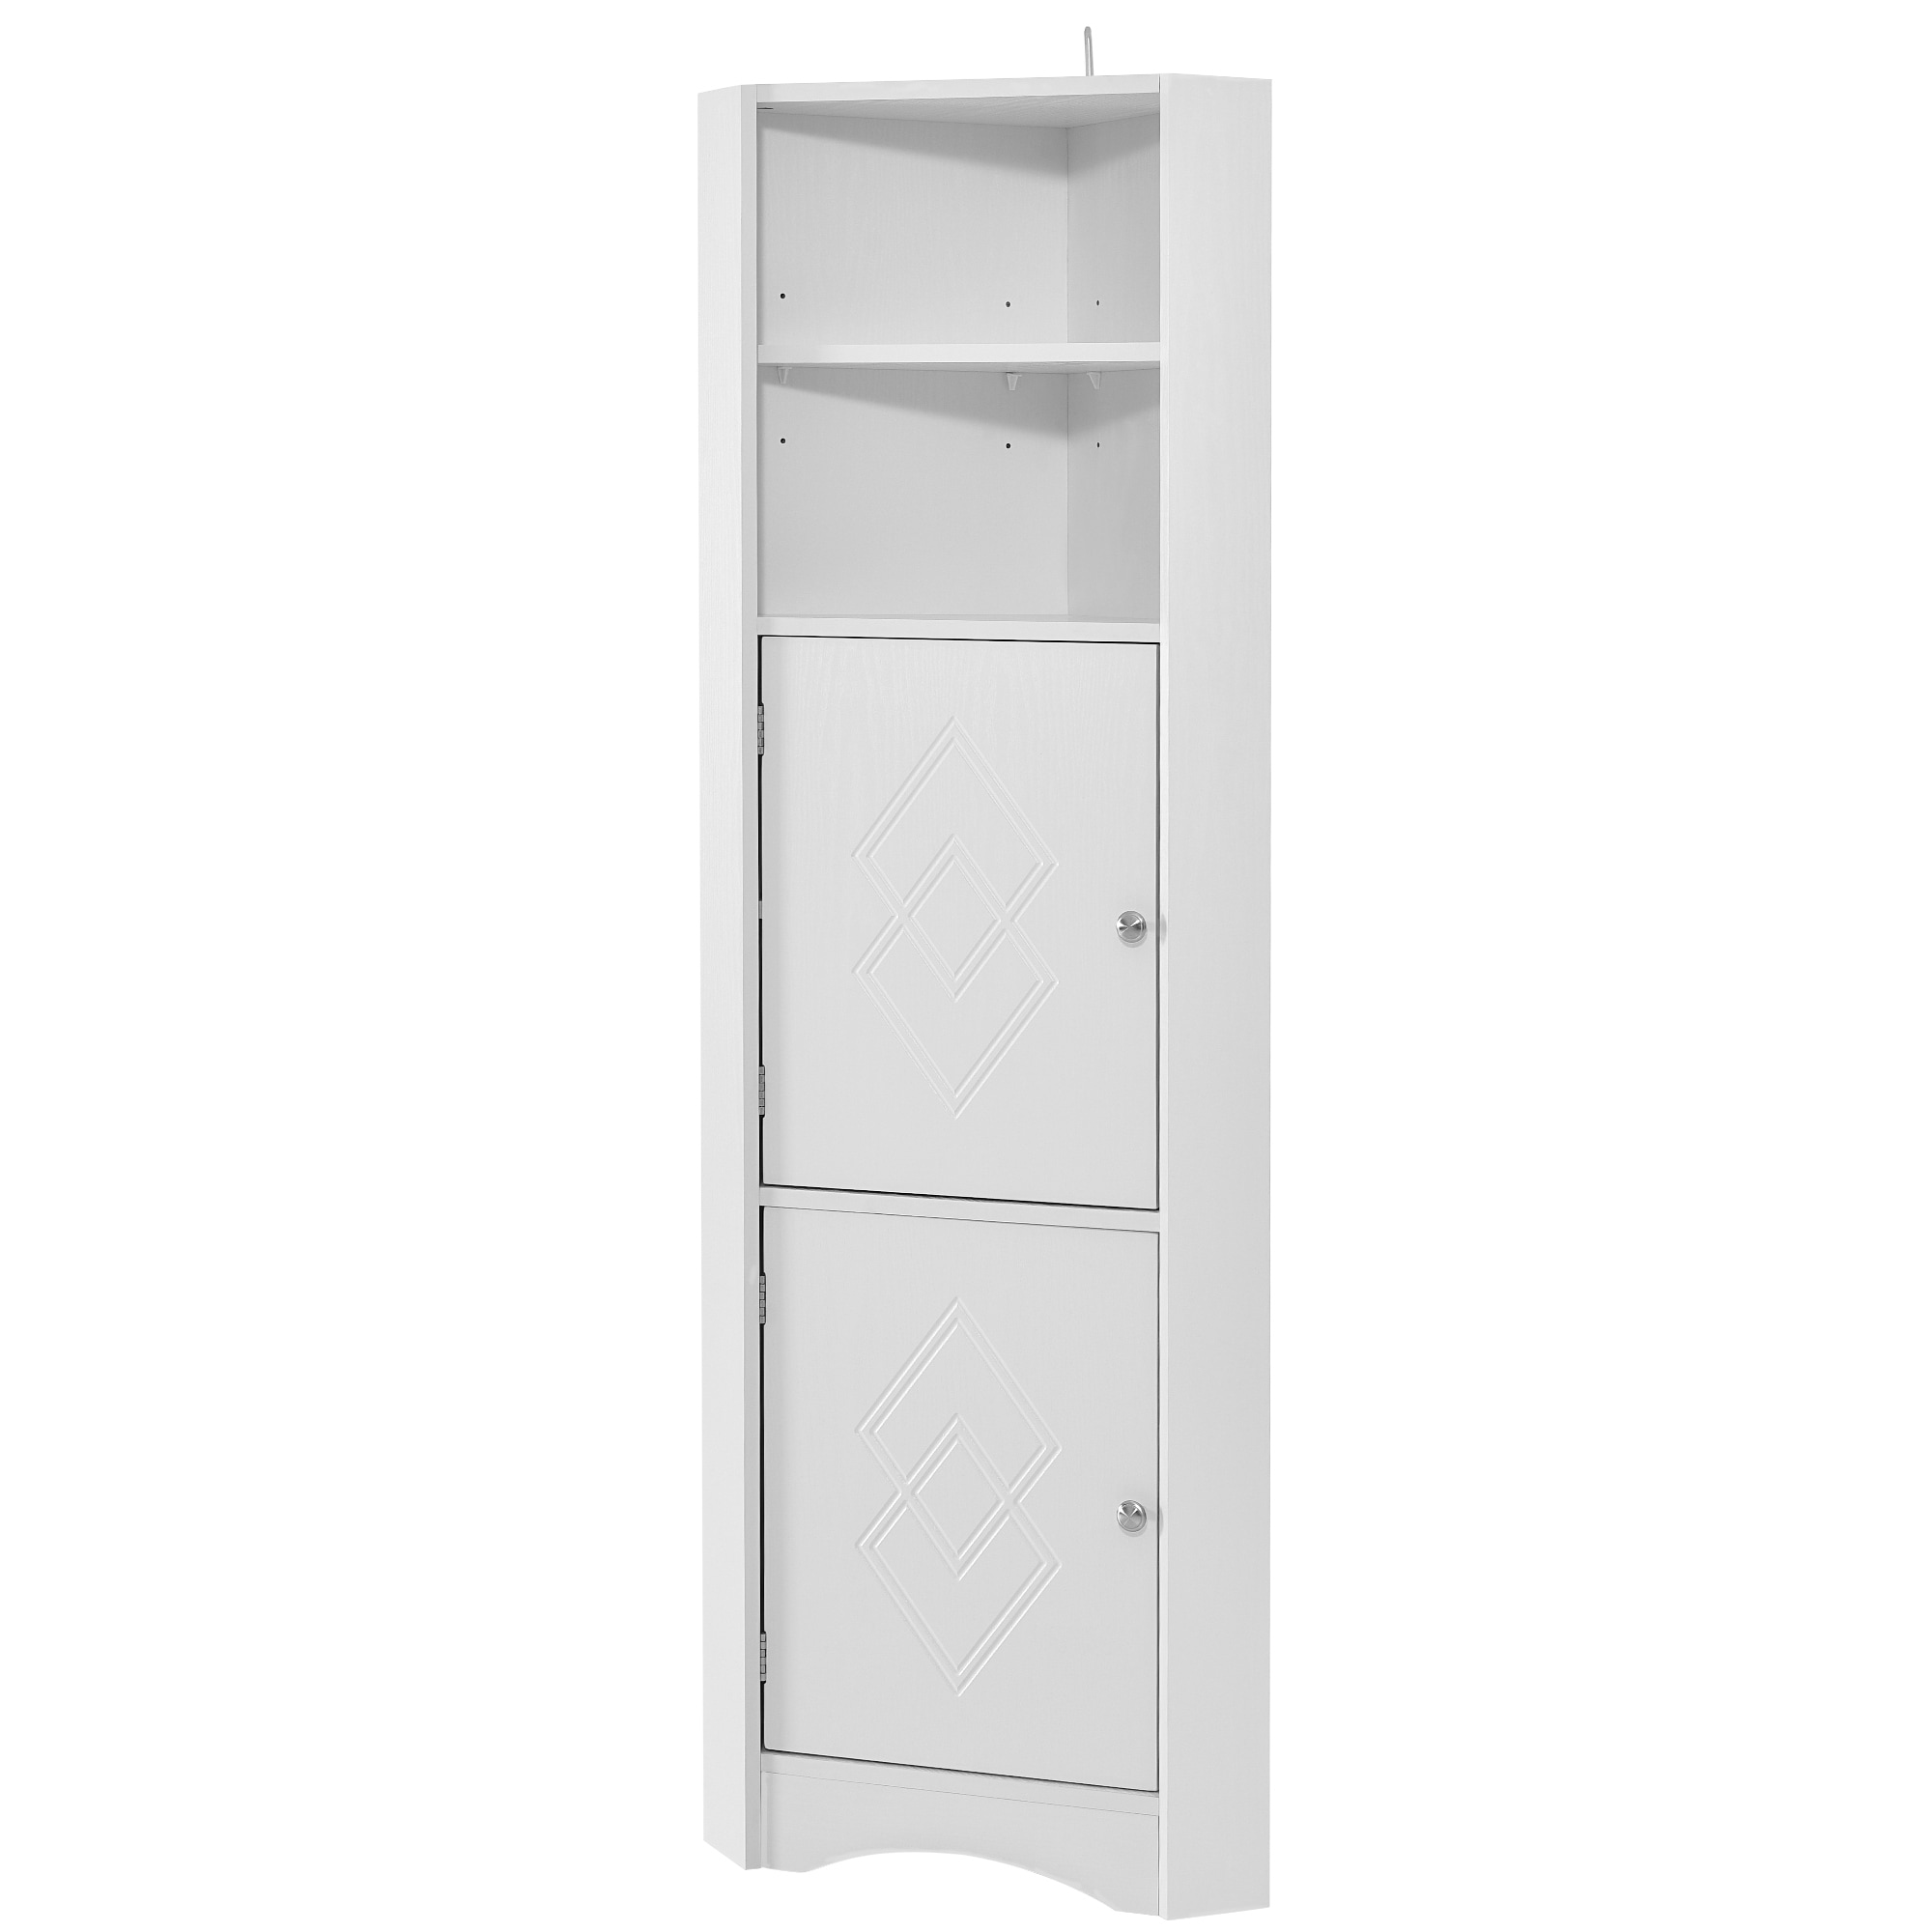 61 Tall Bathroom Corner Cabinet, Freestanding Storage Cabinet with 2 Doors  and 3 Adjustable Shelves, Narrow Tall Cabinet for Bathroom, Living Room,  Bedroom, White 